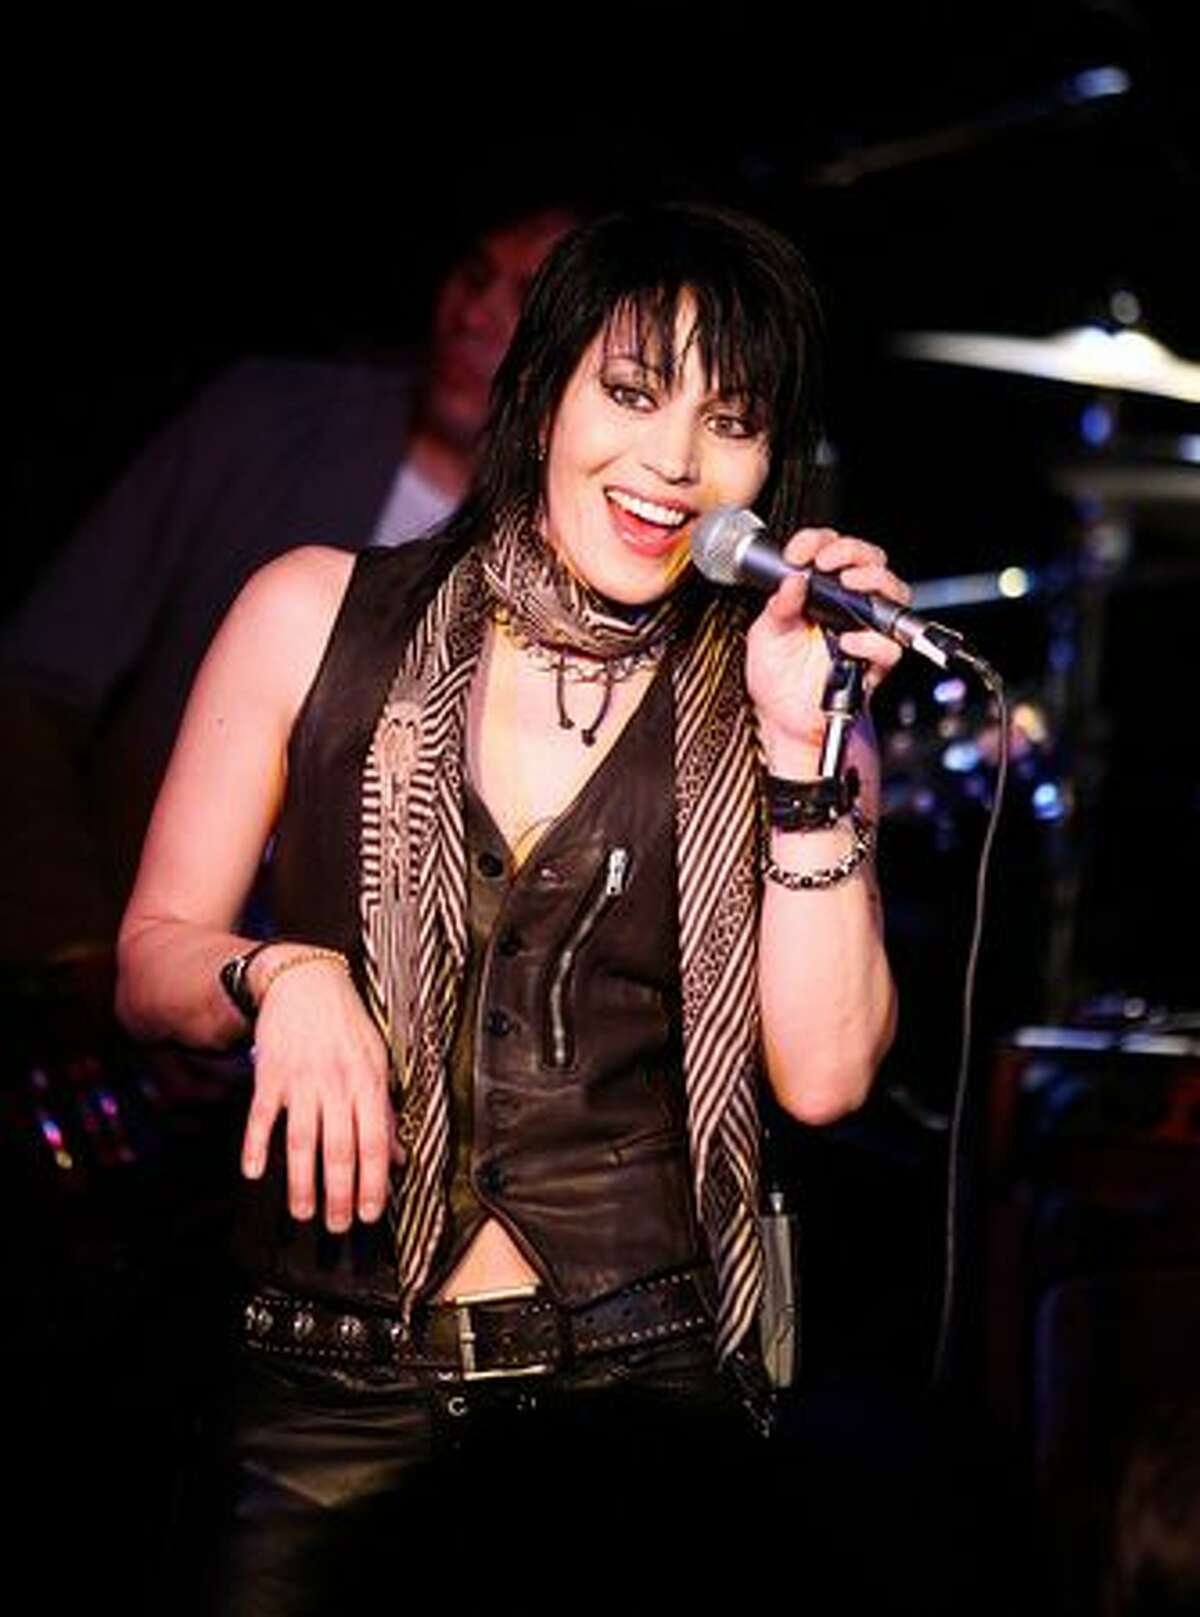 Joan Jett - Looked up to by rock girl wannabes all over the world, the Runaways founding member has appeared on several dates, opening for artists like Def Leppard, and most recently at Sundance, where a film about her life is making the rounds.